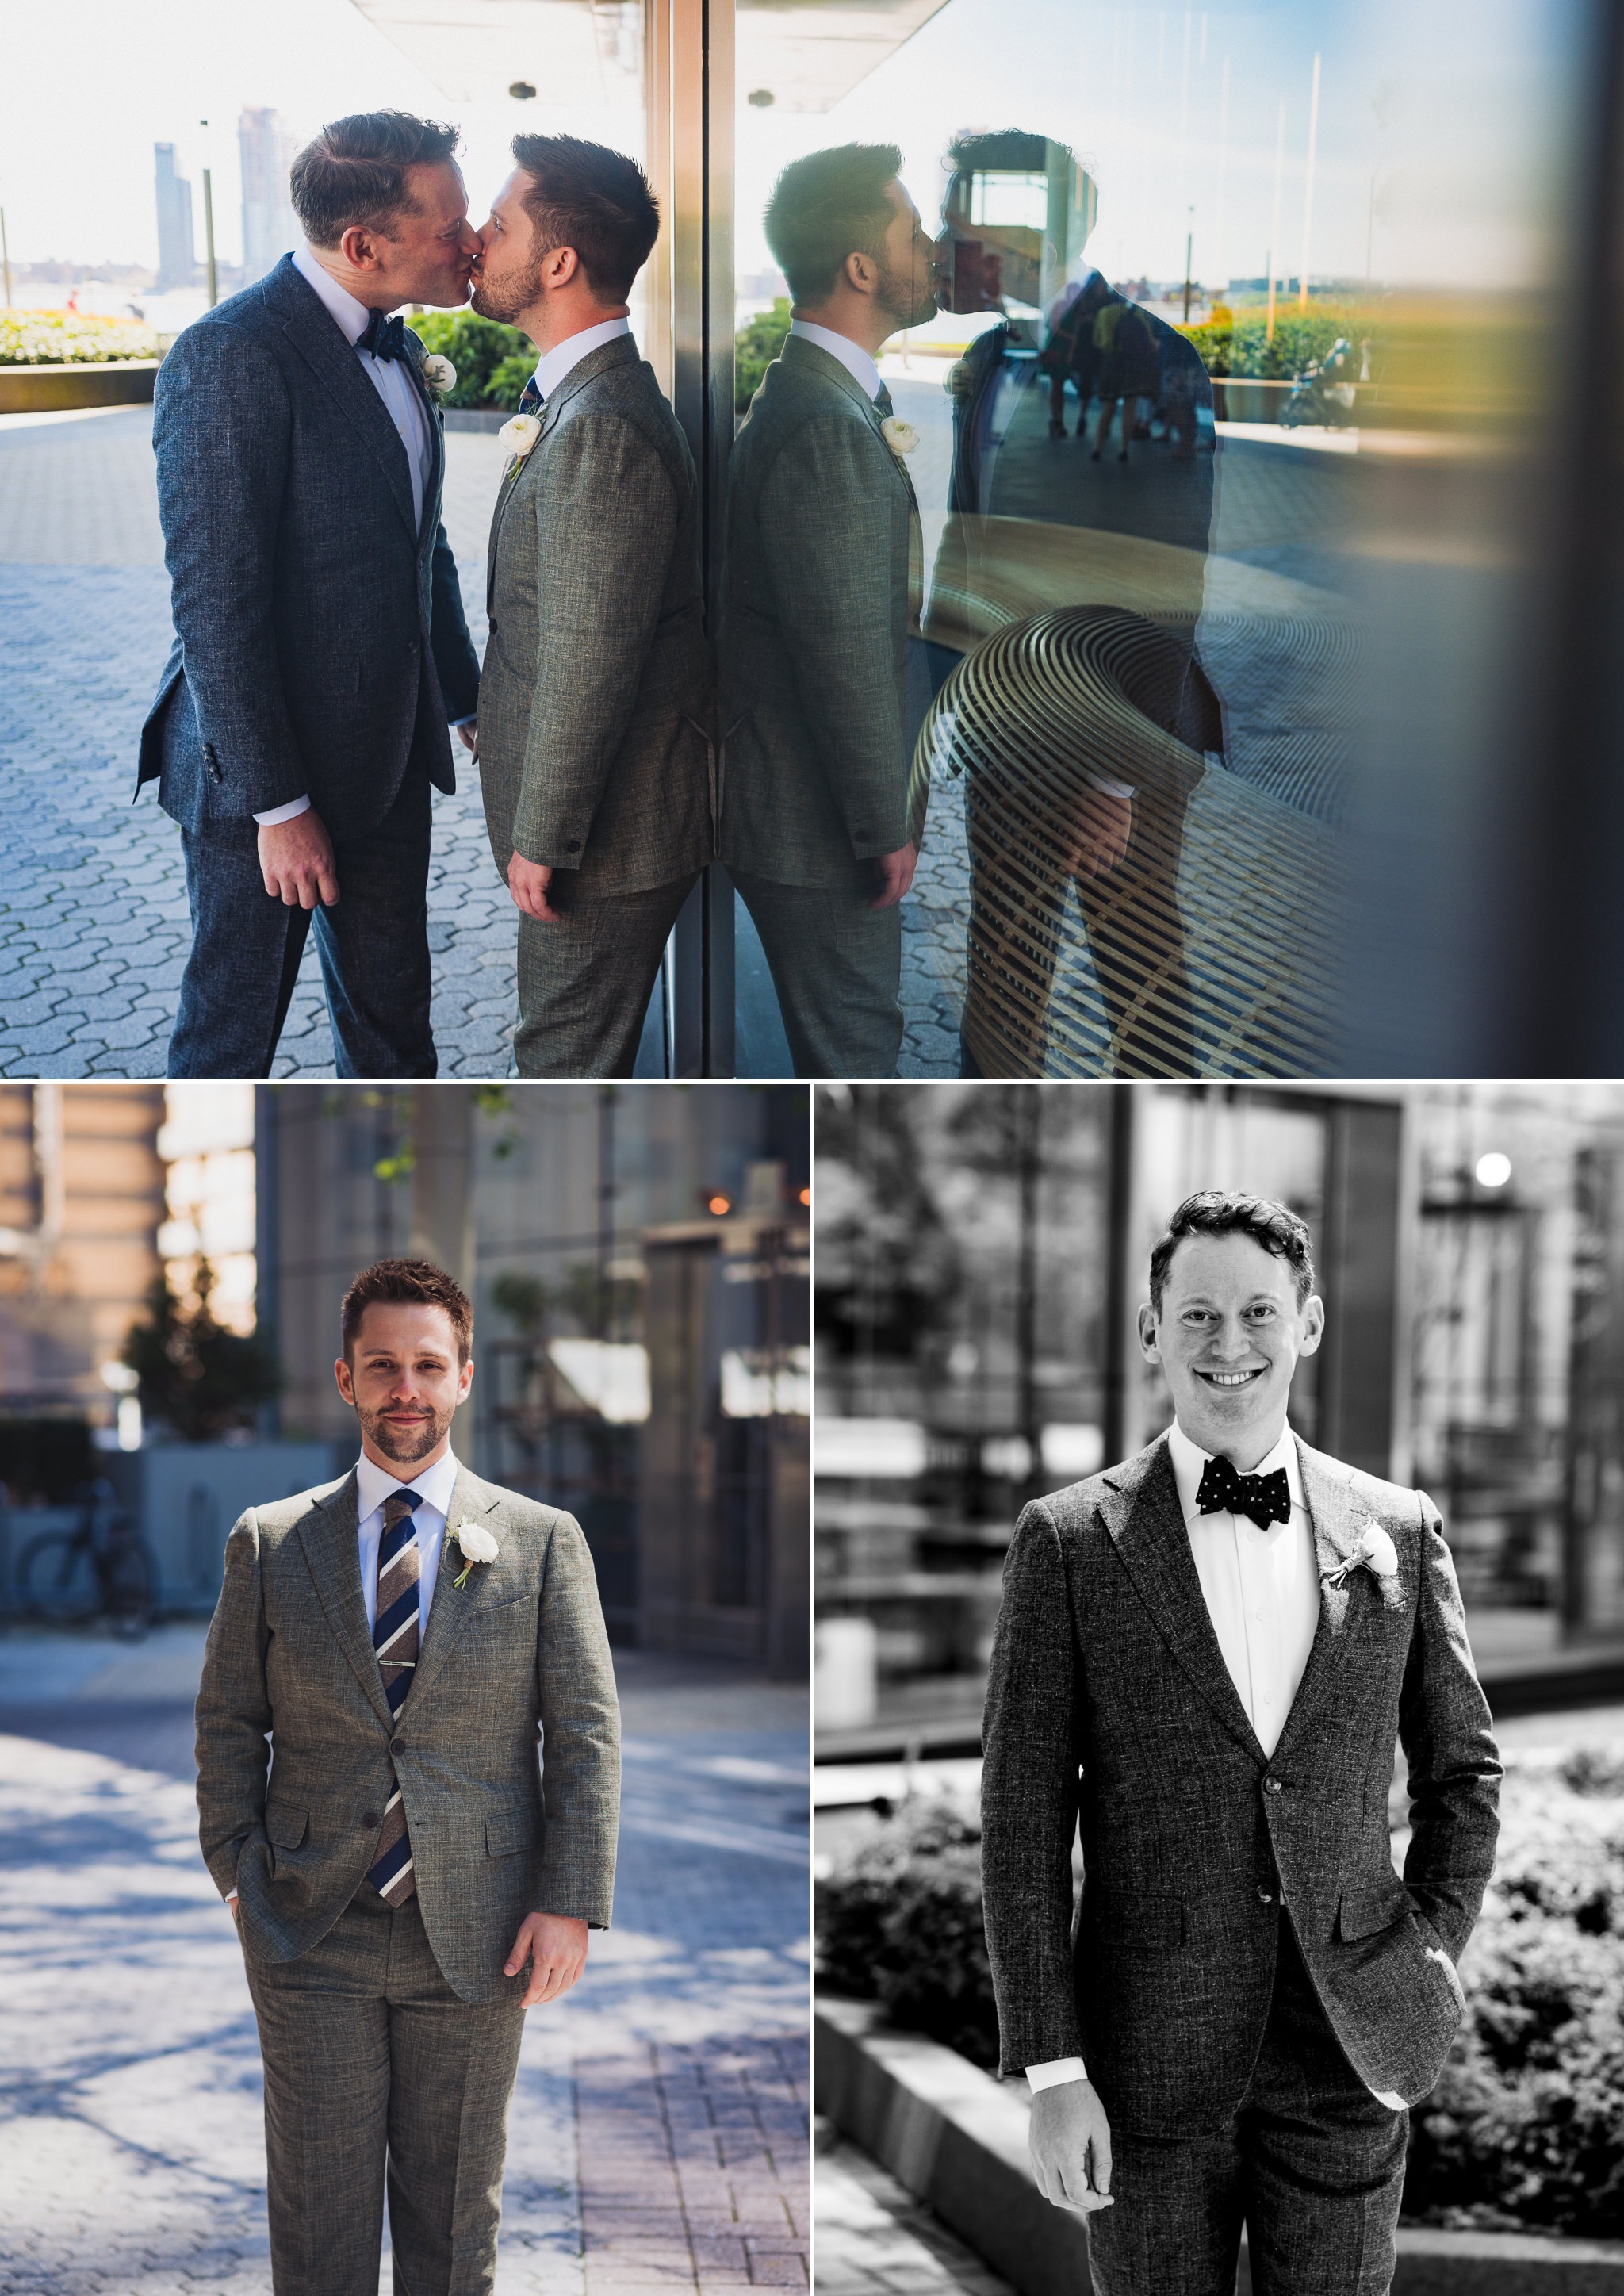  More scenes from Brian and Scott's gay wedding at Riverpark NYC. There's a certain timeless quality to good black and white images, and these were no exception.  